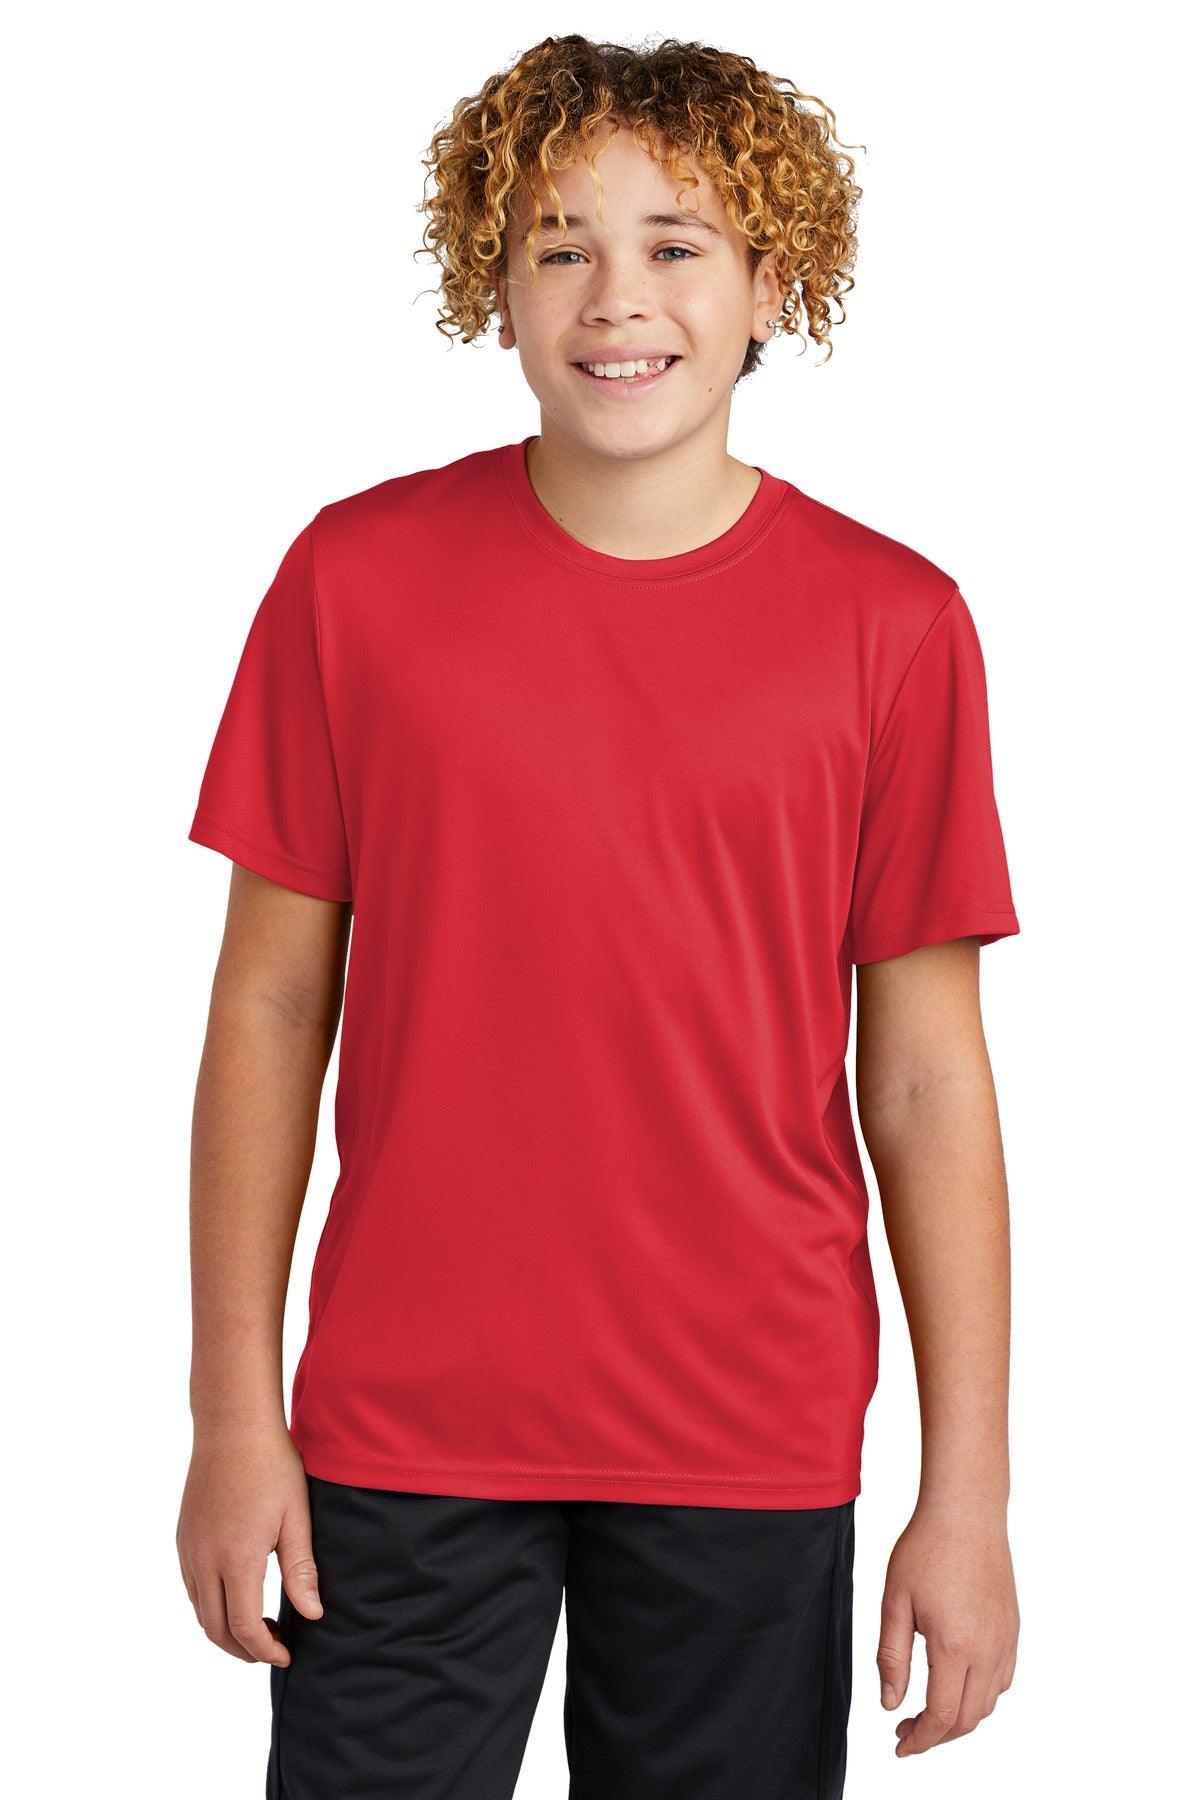 Sport-Tek Youth PosiCharge Re-Compete Tee YST720 - Dresses Max